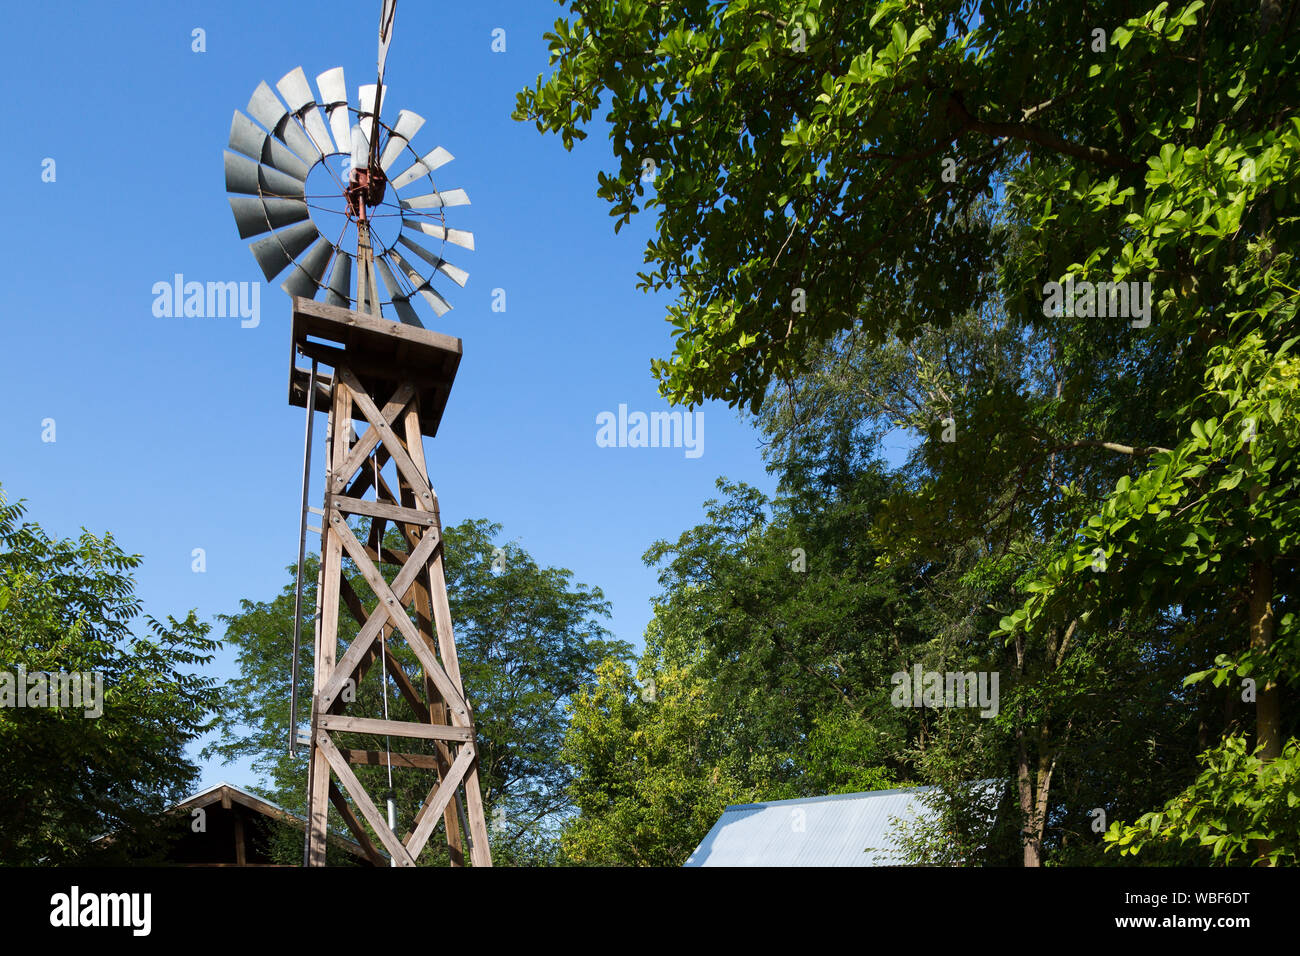 An antique windmill in the Indiana Family Farm Exhibit at the Fort Wayne Children's Zoo in Fort Wayne, Ind., USA. Stock Photo